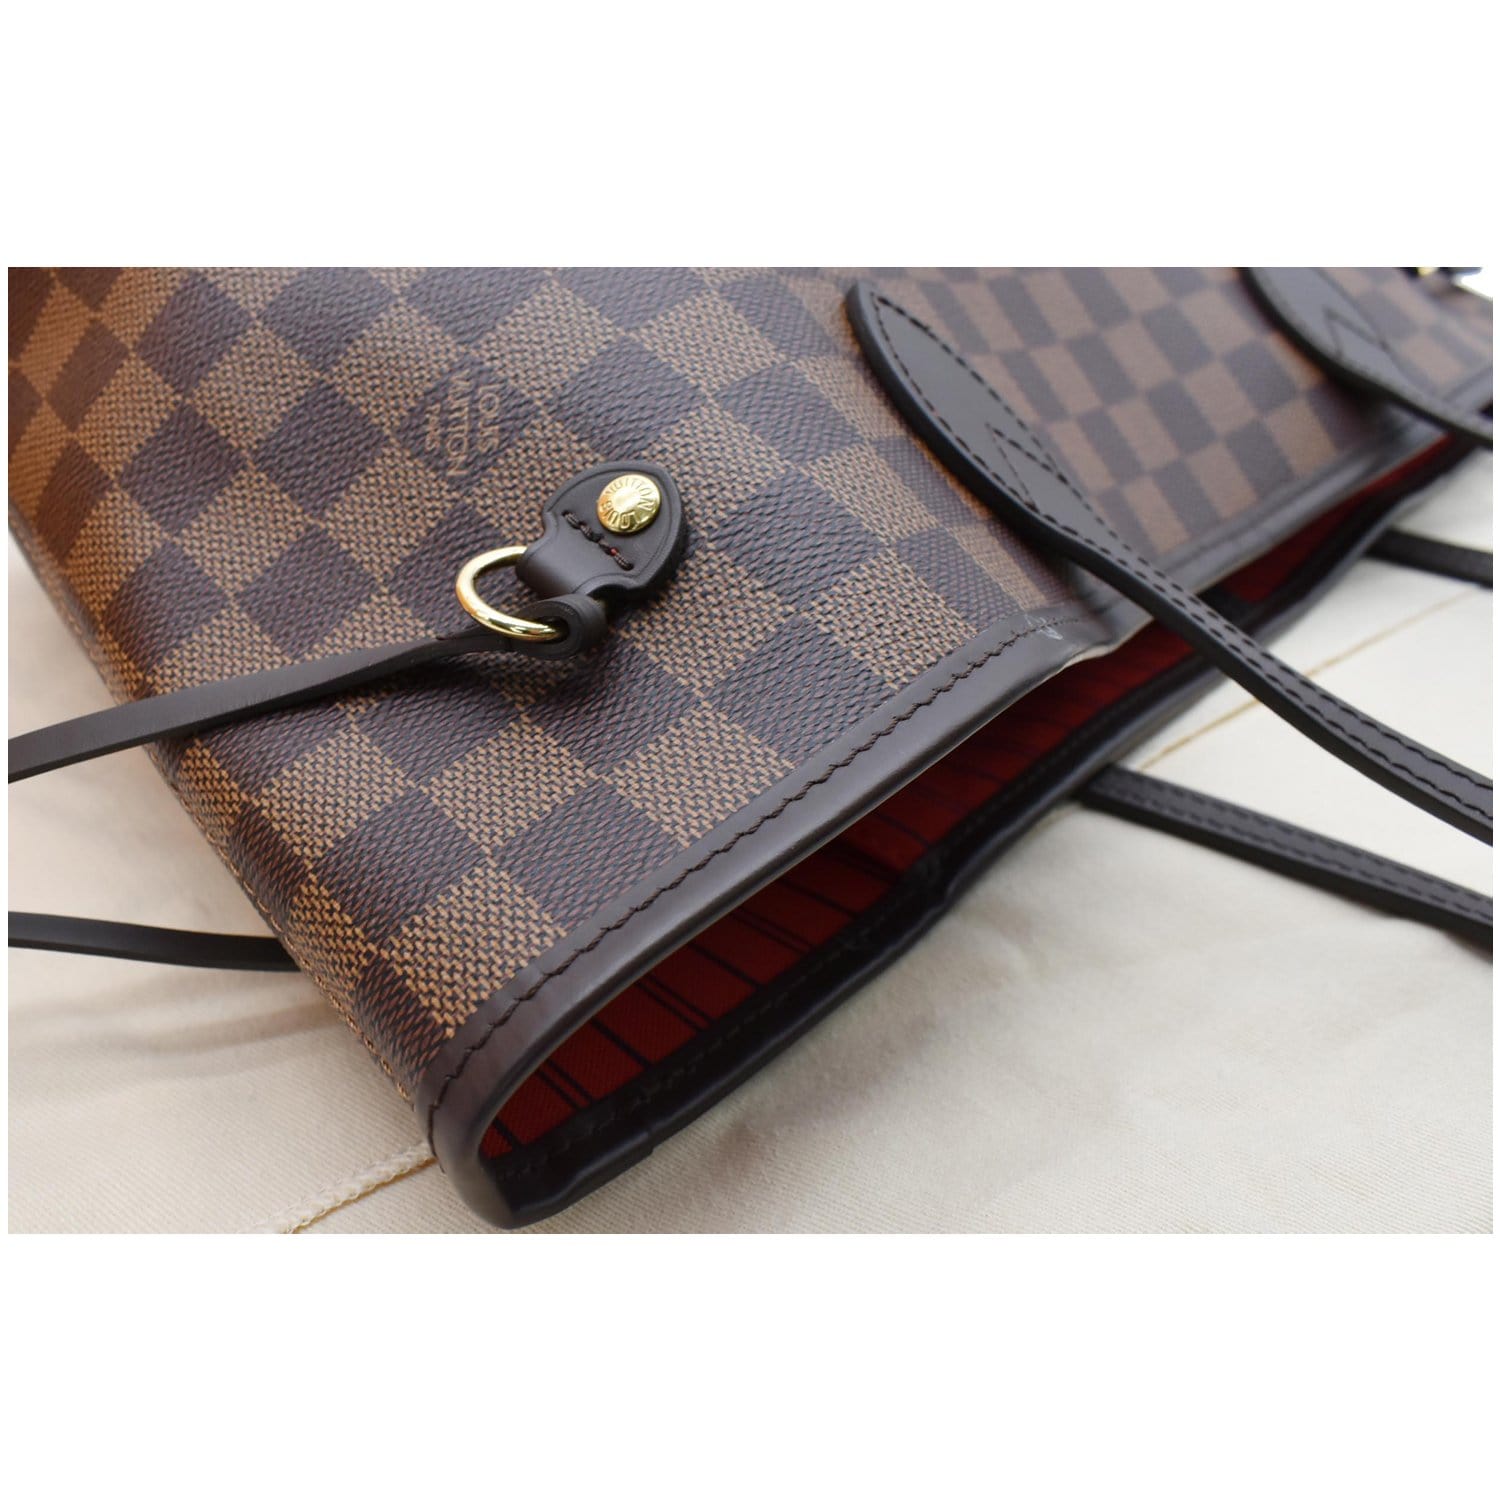 Authentic Louis Vuitton Damier Ebene Neverfull MM Tote Bag Brown